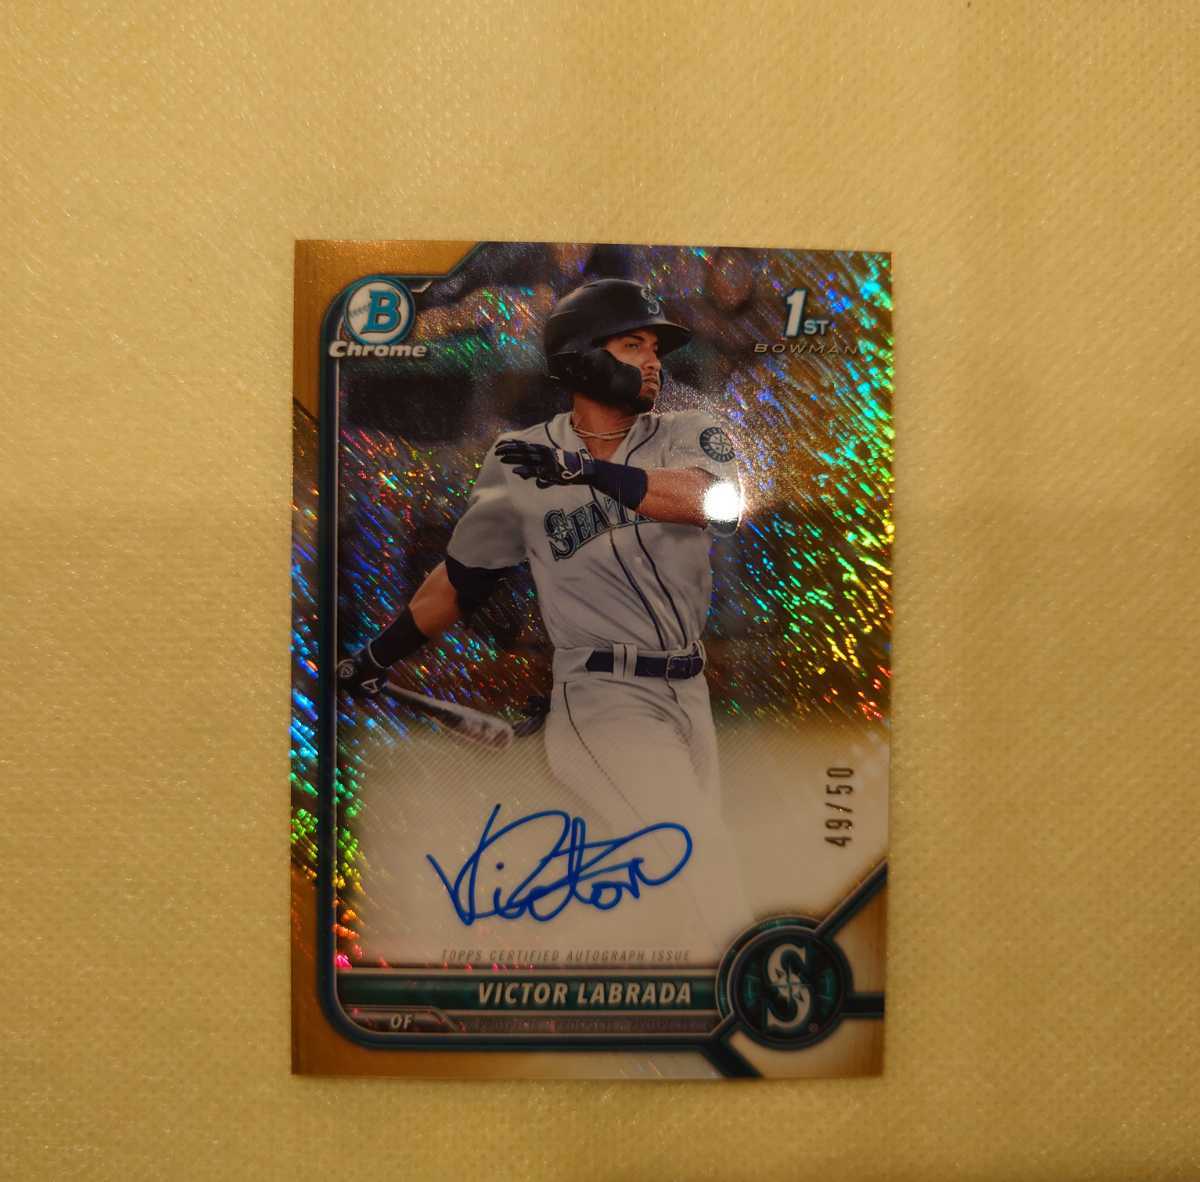 SEATTLE MARINERS VICTOR LABRADA 1st bowman autograph /50シリ Gold shimmerの画像1